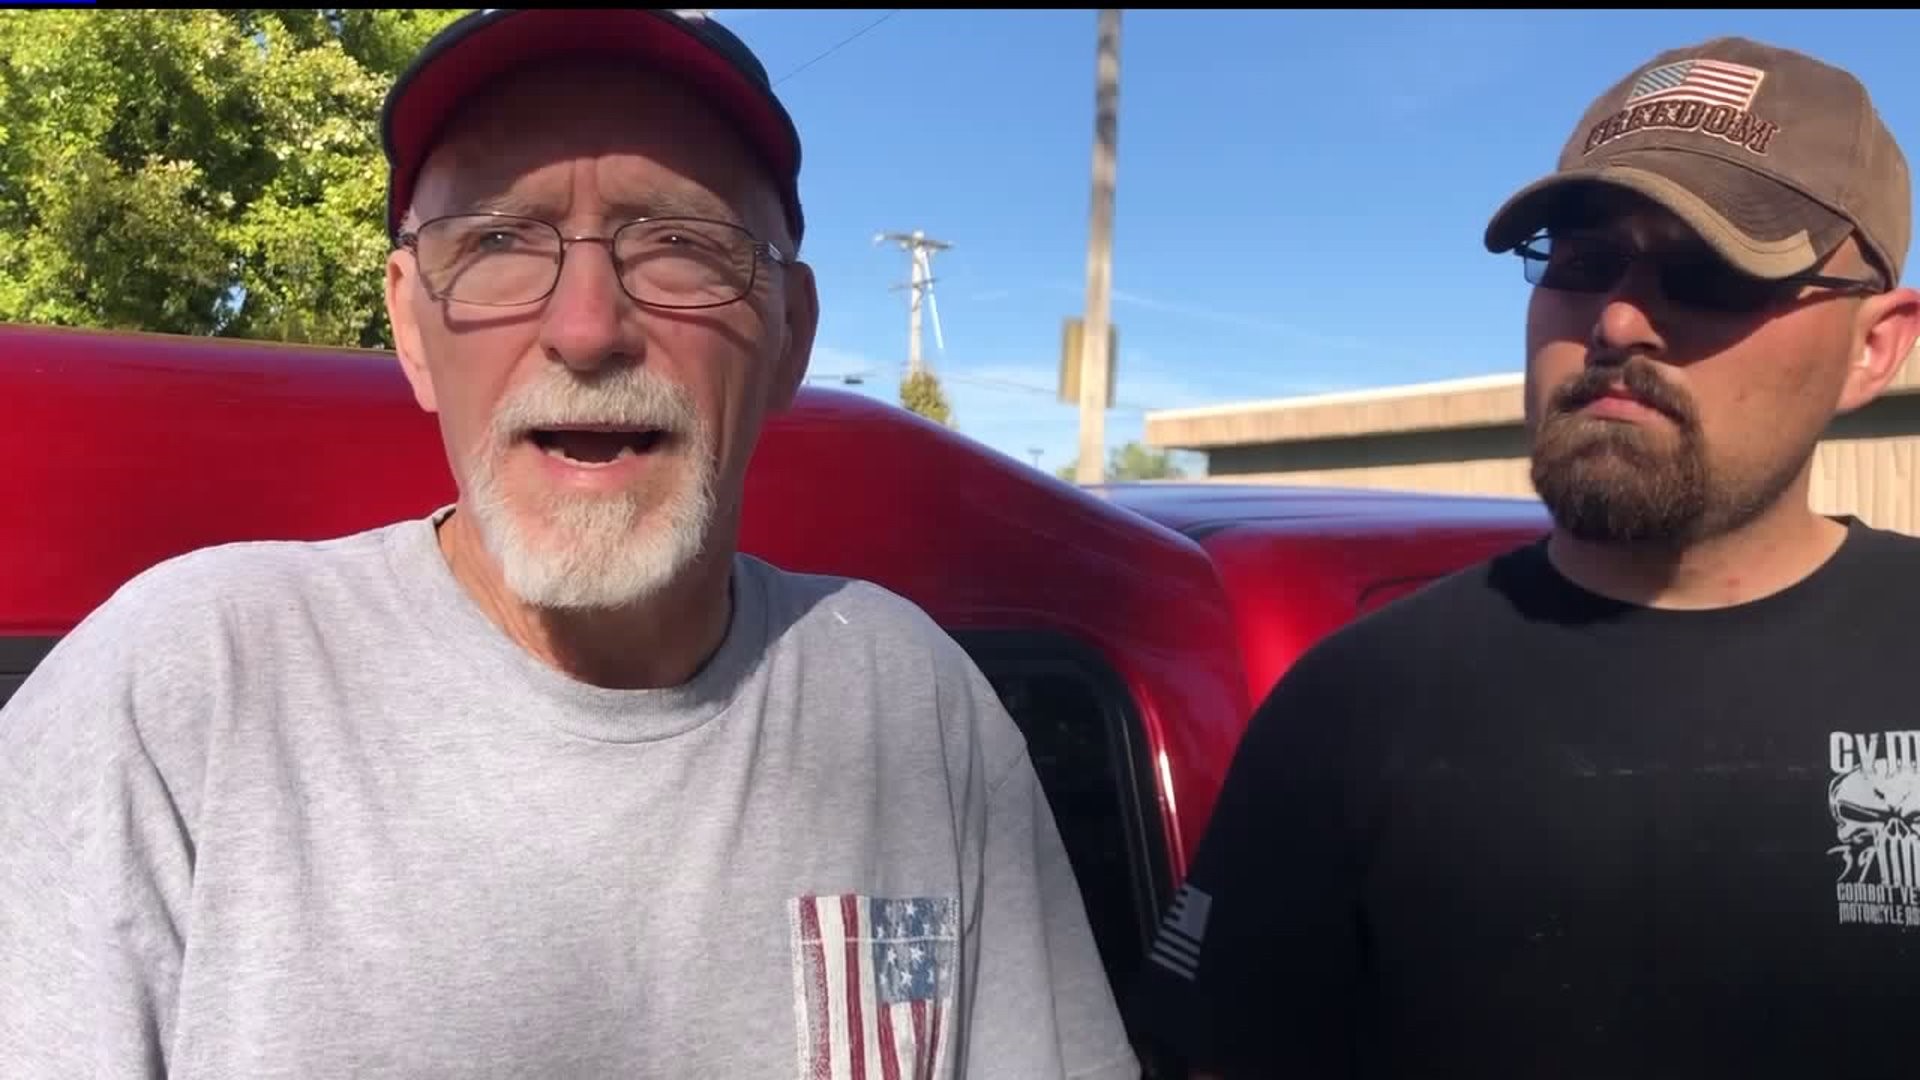 Local Veteran Gets a New Roof